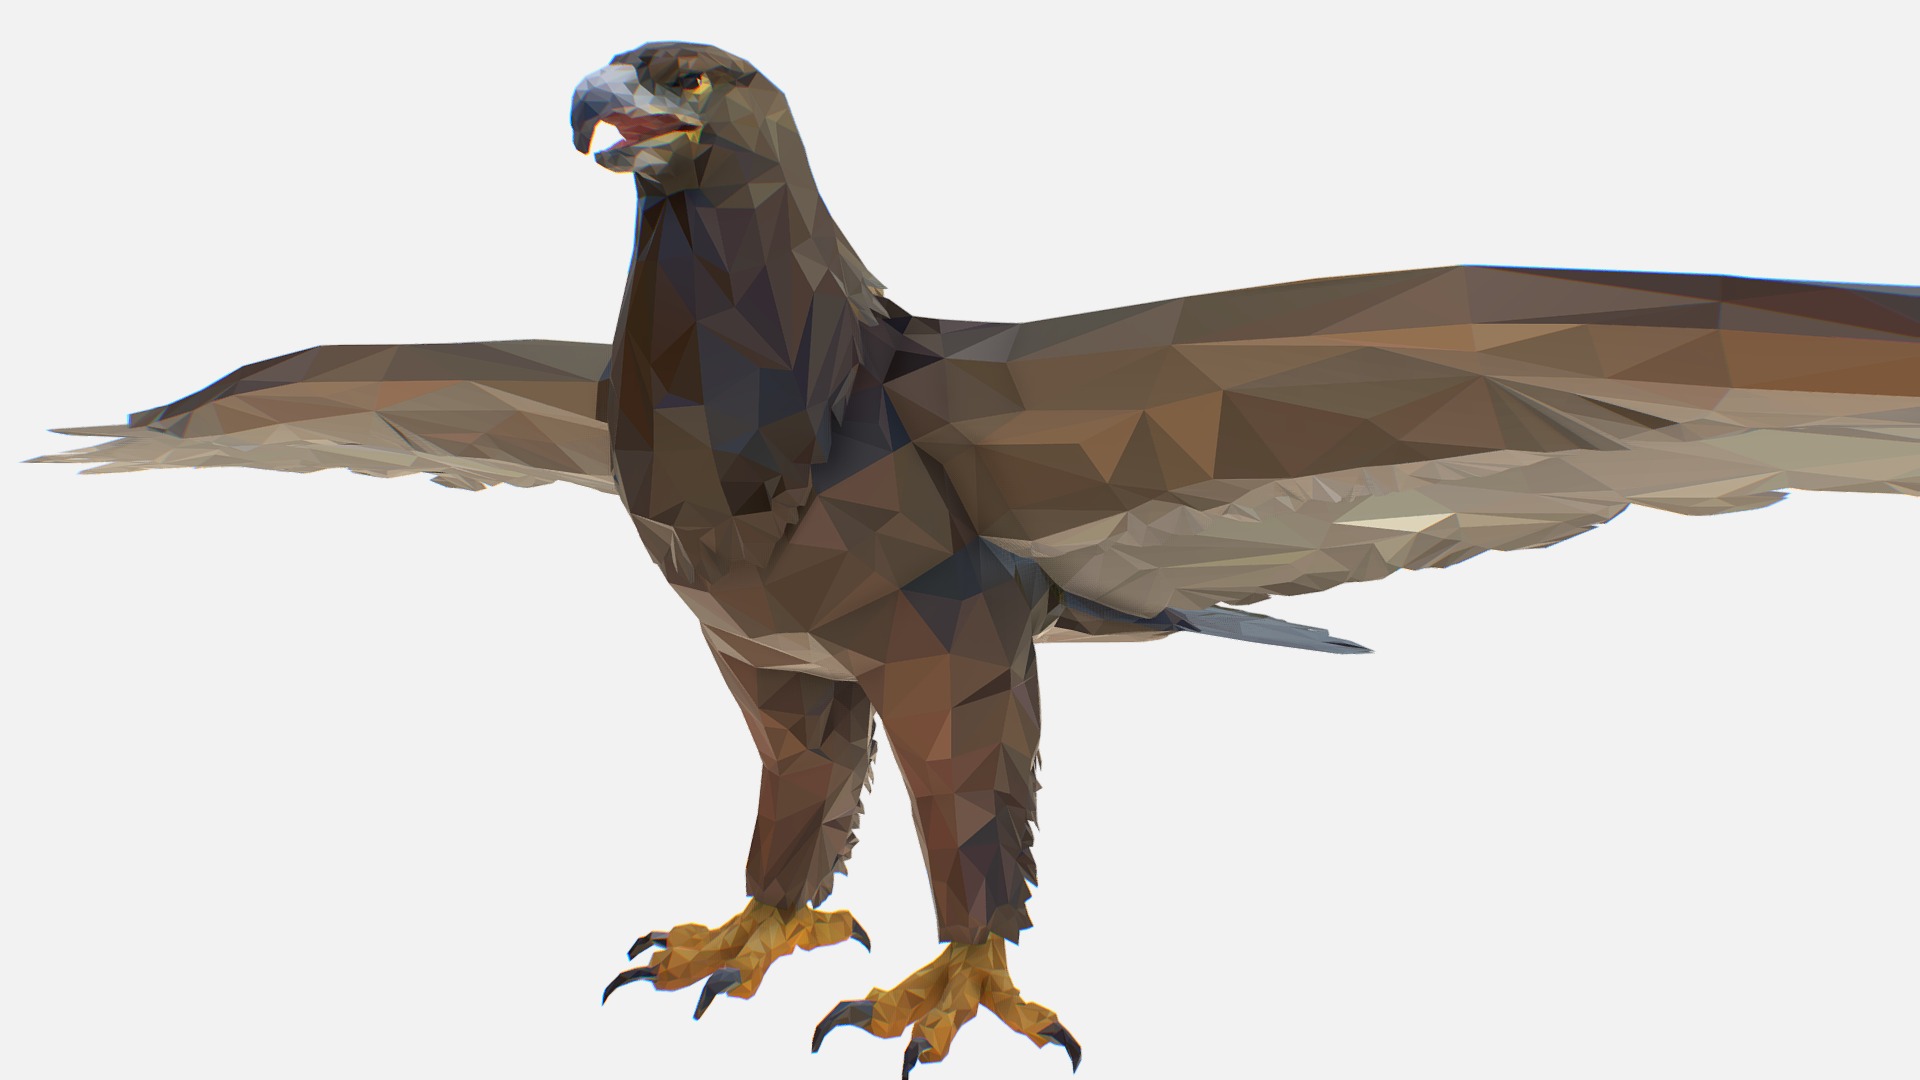 3D model low polygon art Eagle - This is a 3D model of the low polygon art Eagle. The 3D model is about a brown and white bird.